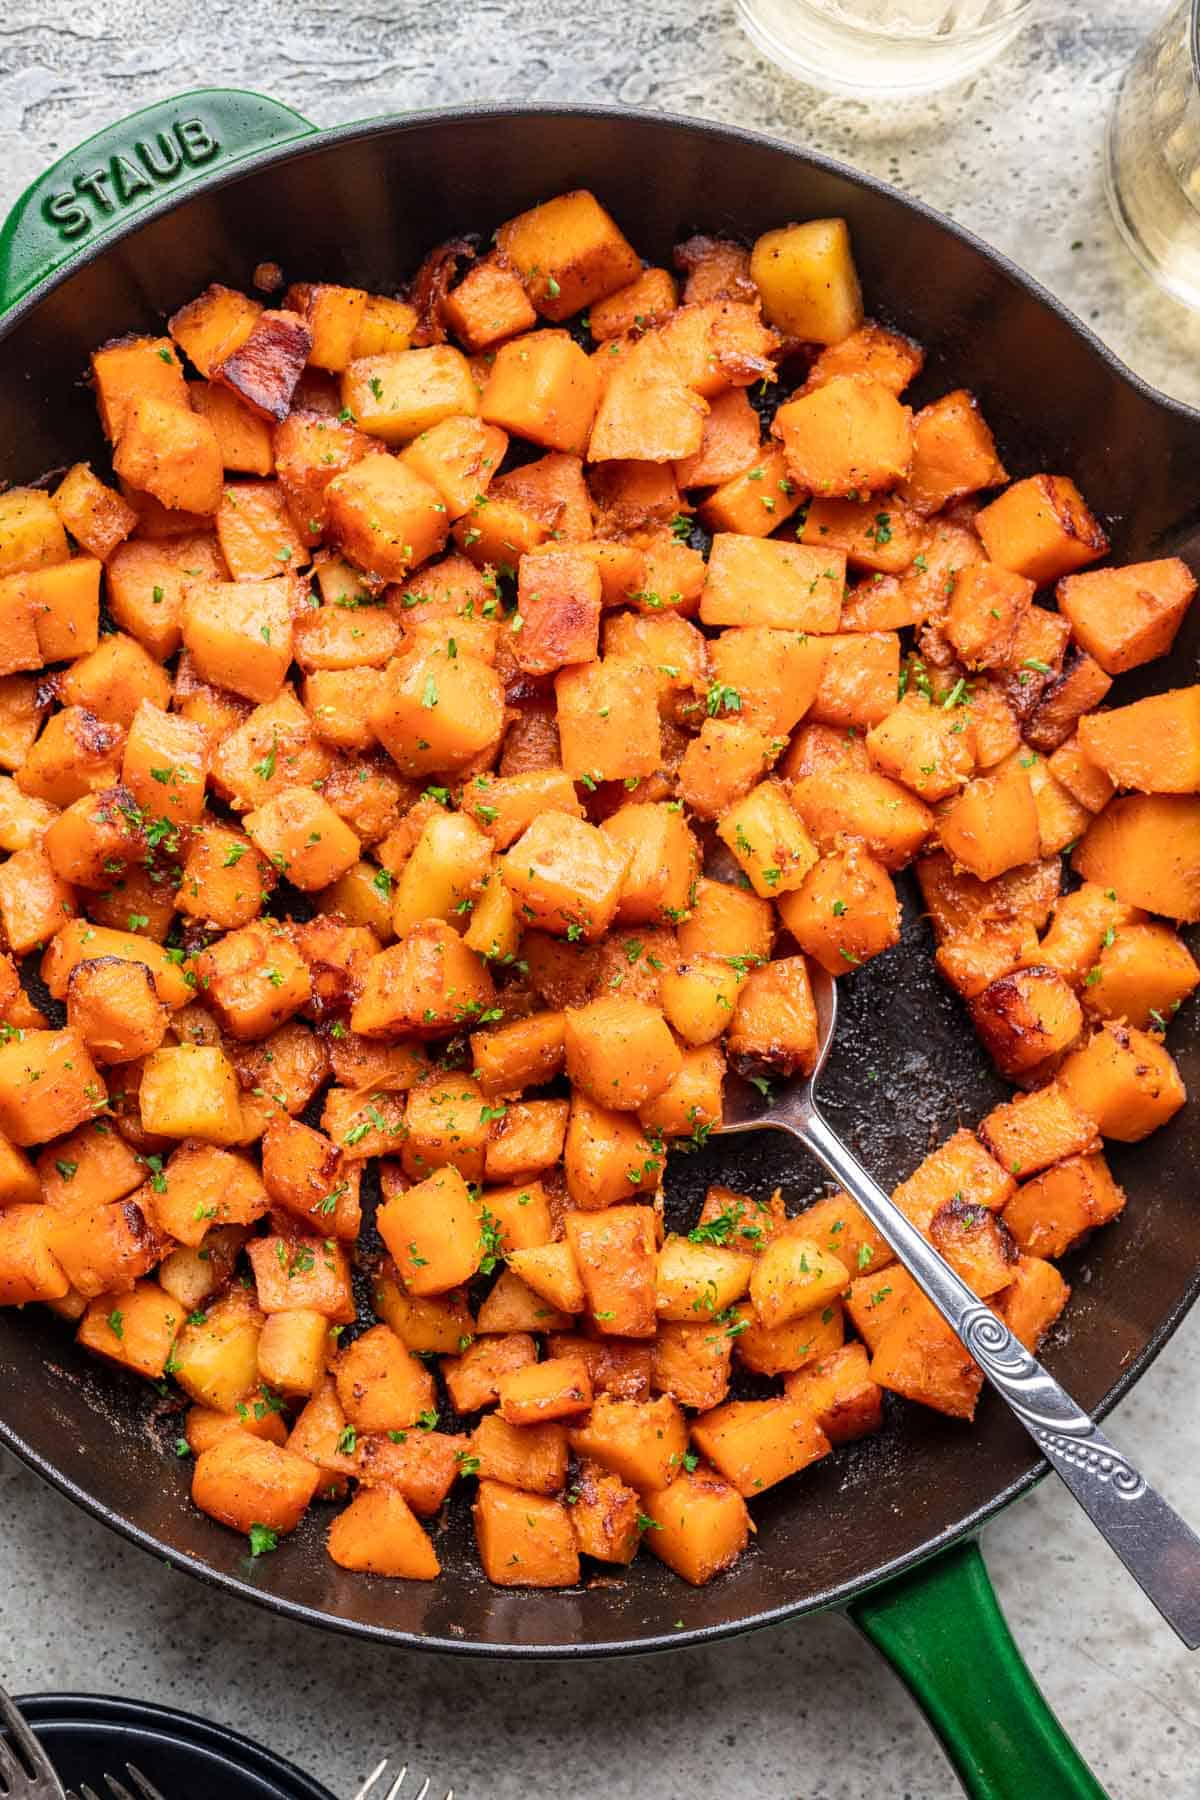 Sautéed butternut squash in a skillet with a serving spoon.